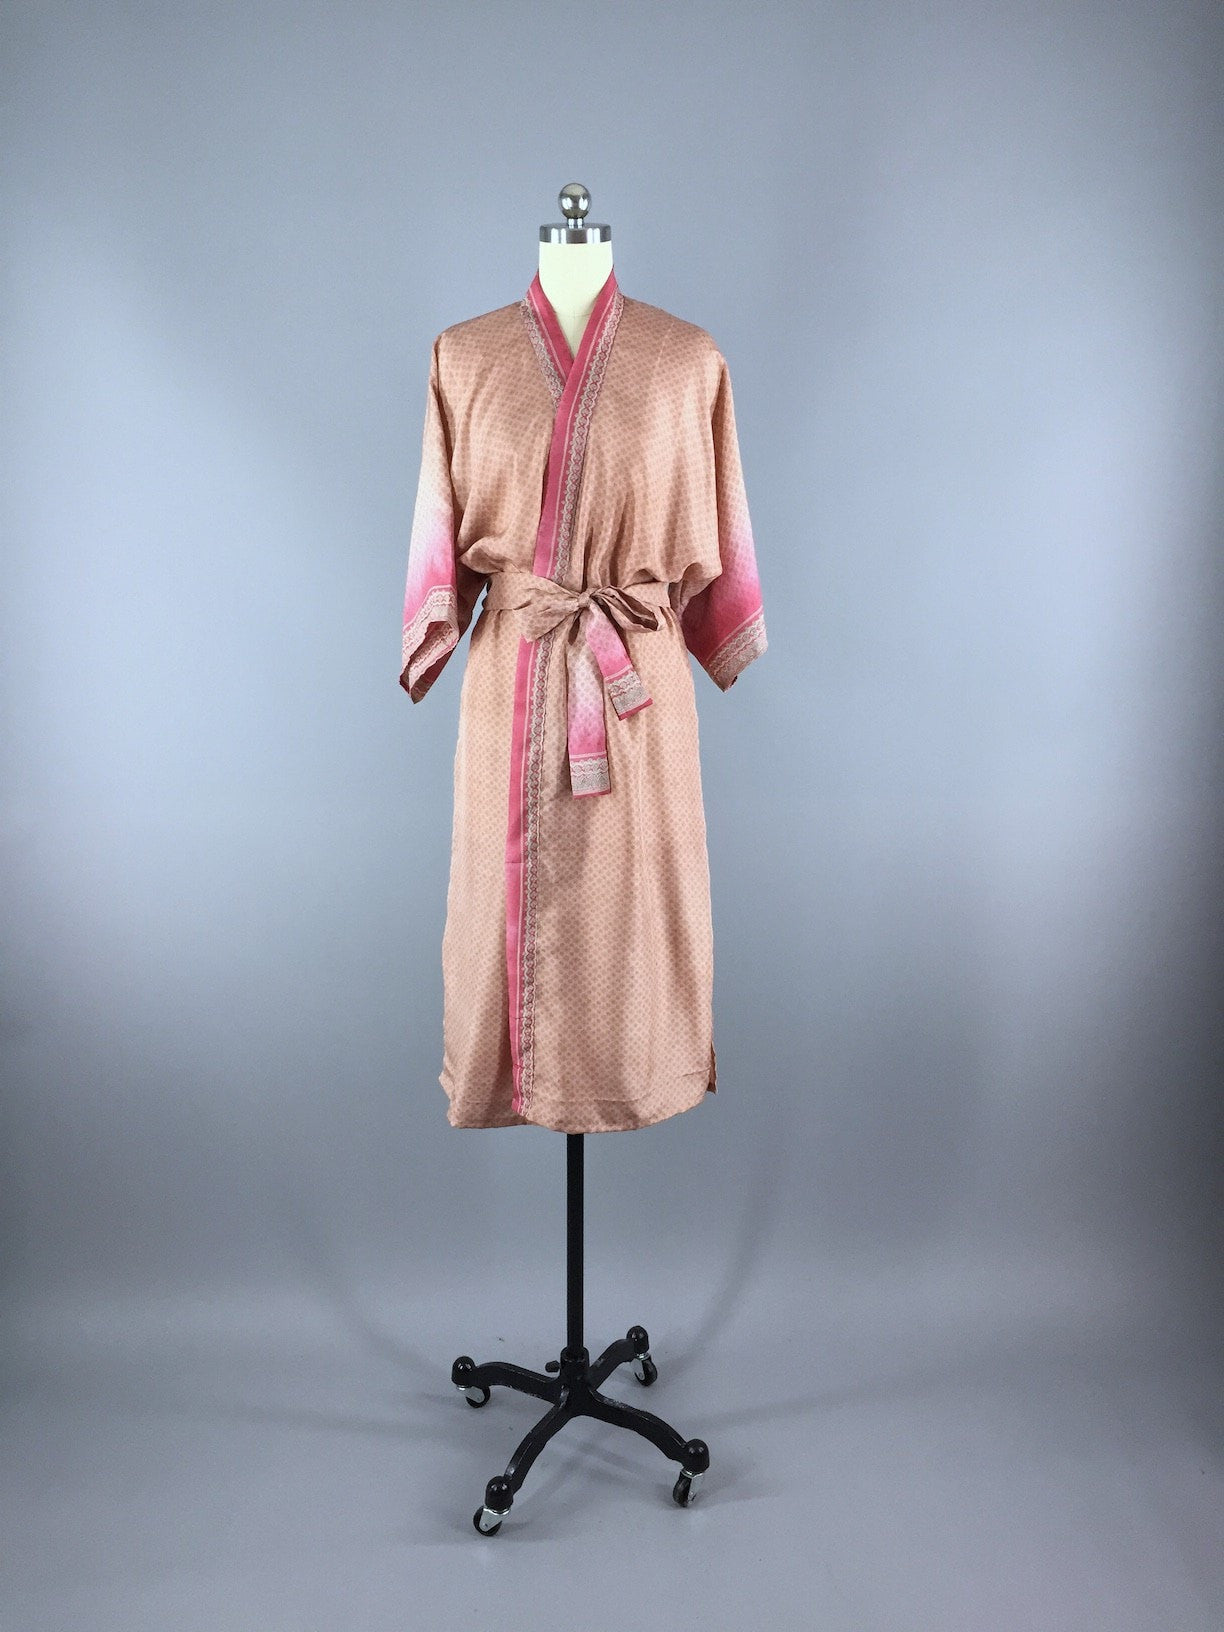 Pink Terracotta Floral Print Robe made from a Vintage Indian Sari - ThisBlueBird